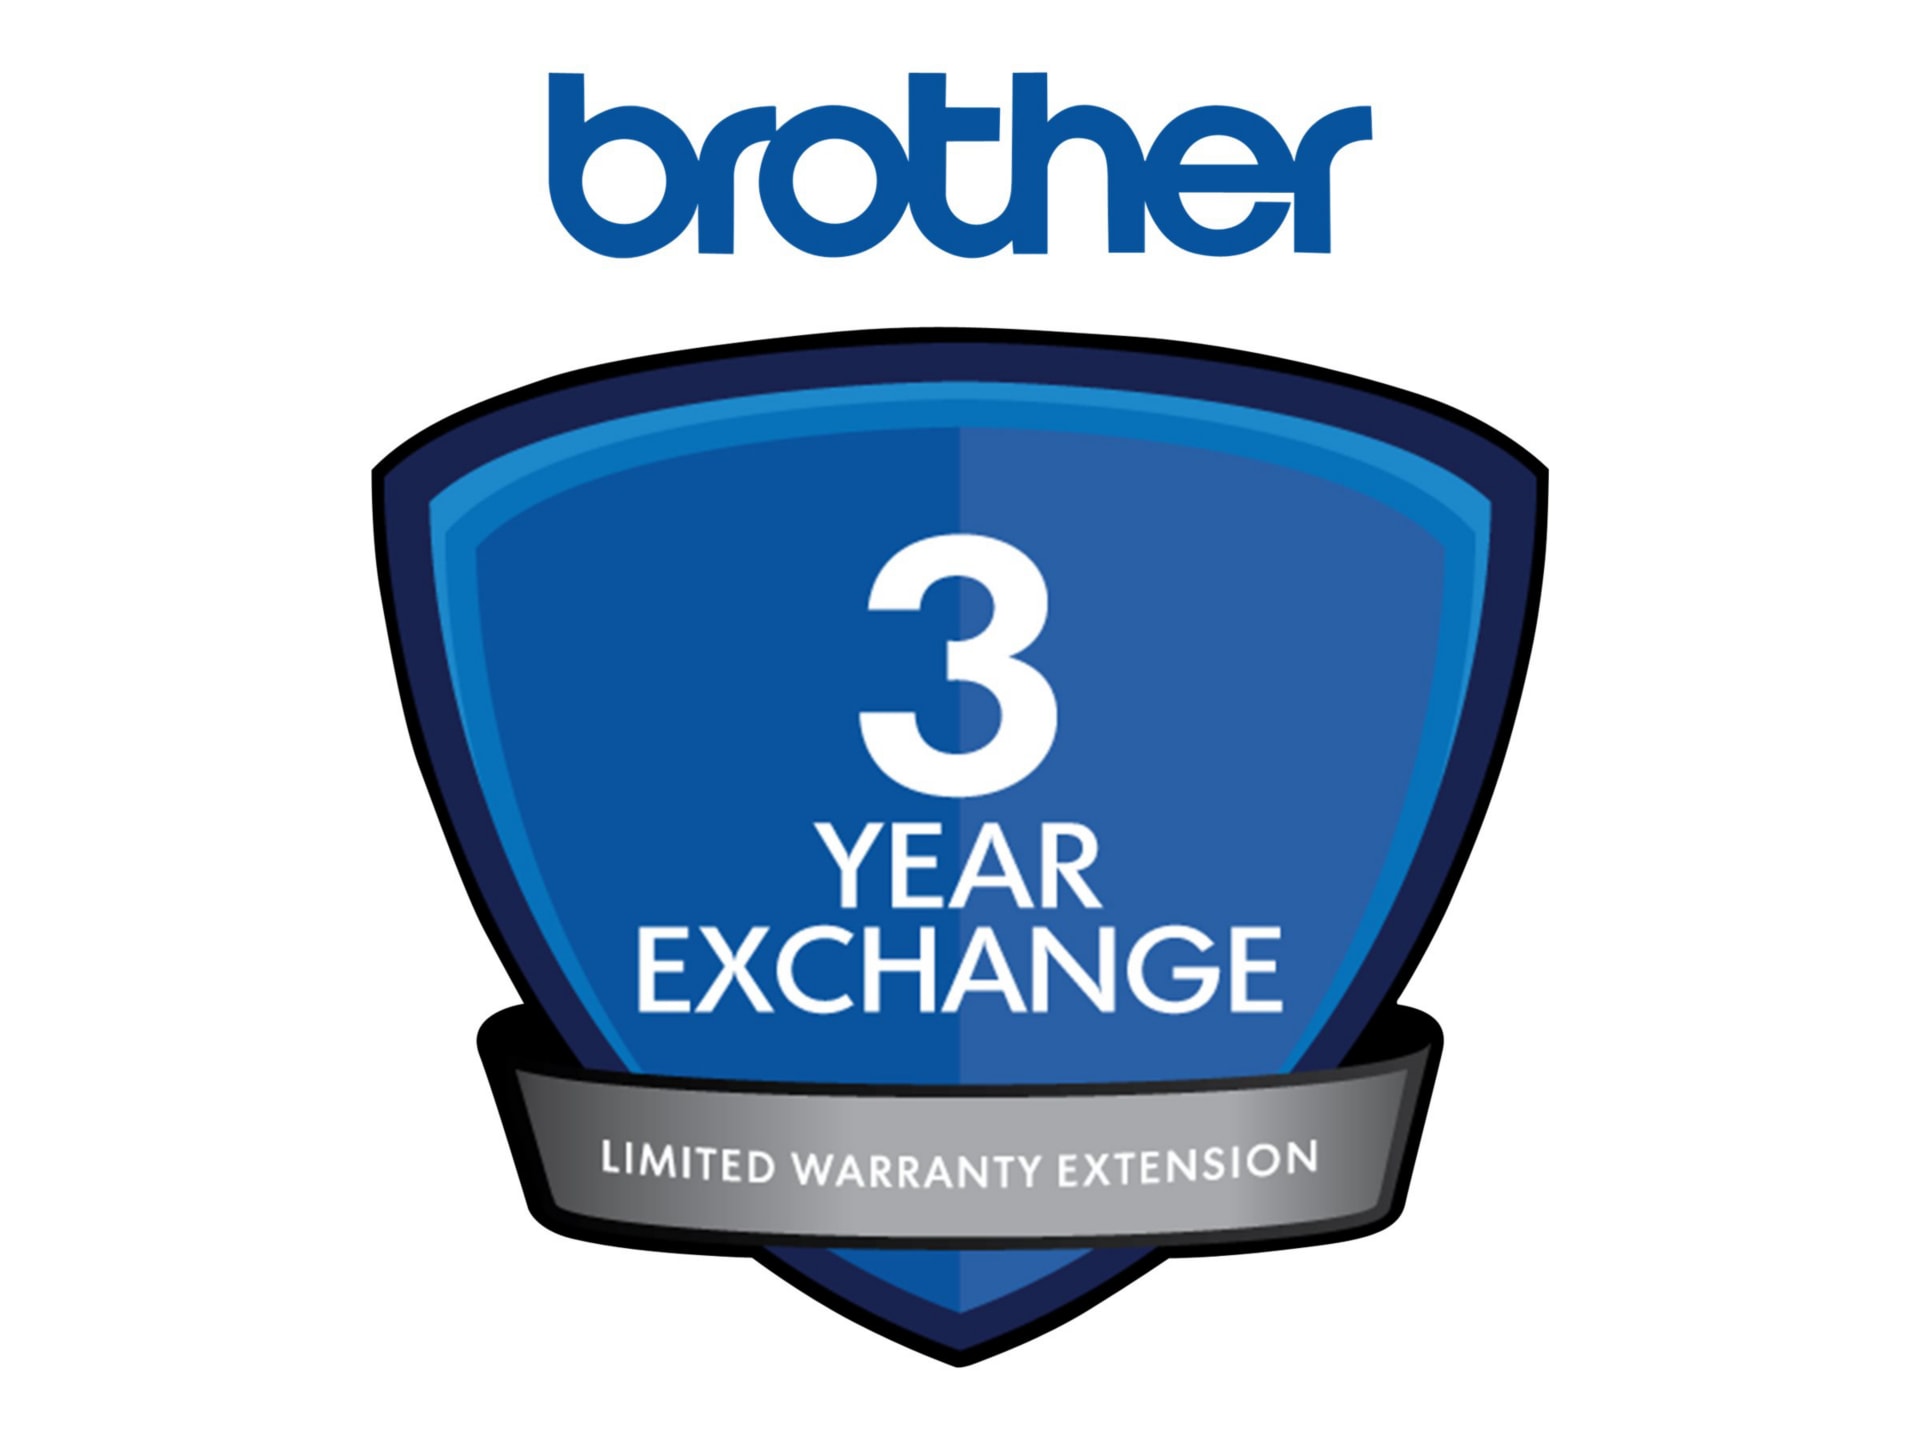 Brother On Site Warranty Service and Support - extended service agreement - 3 years - on-site